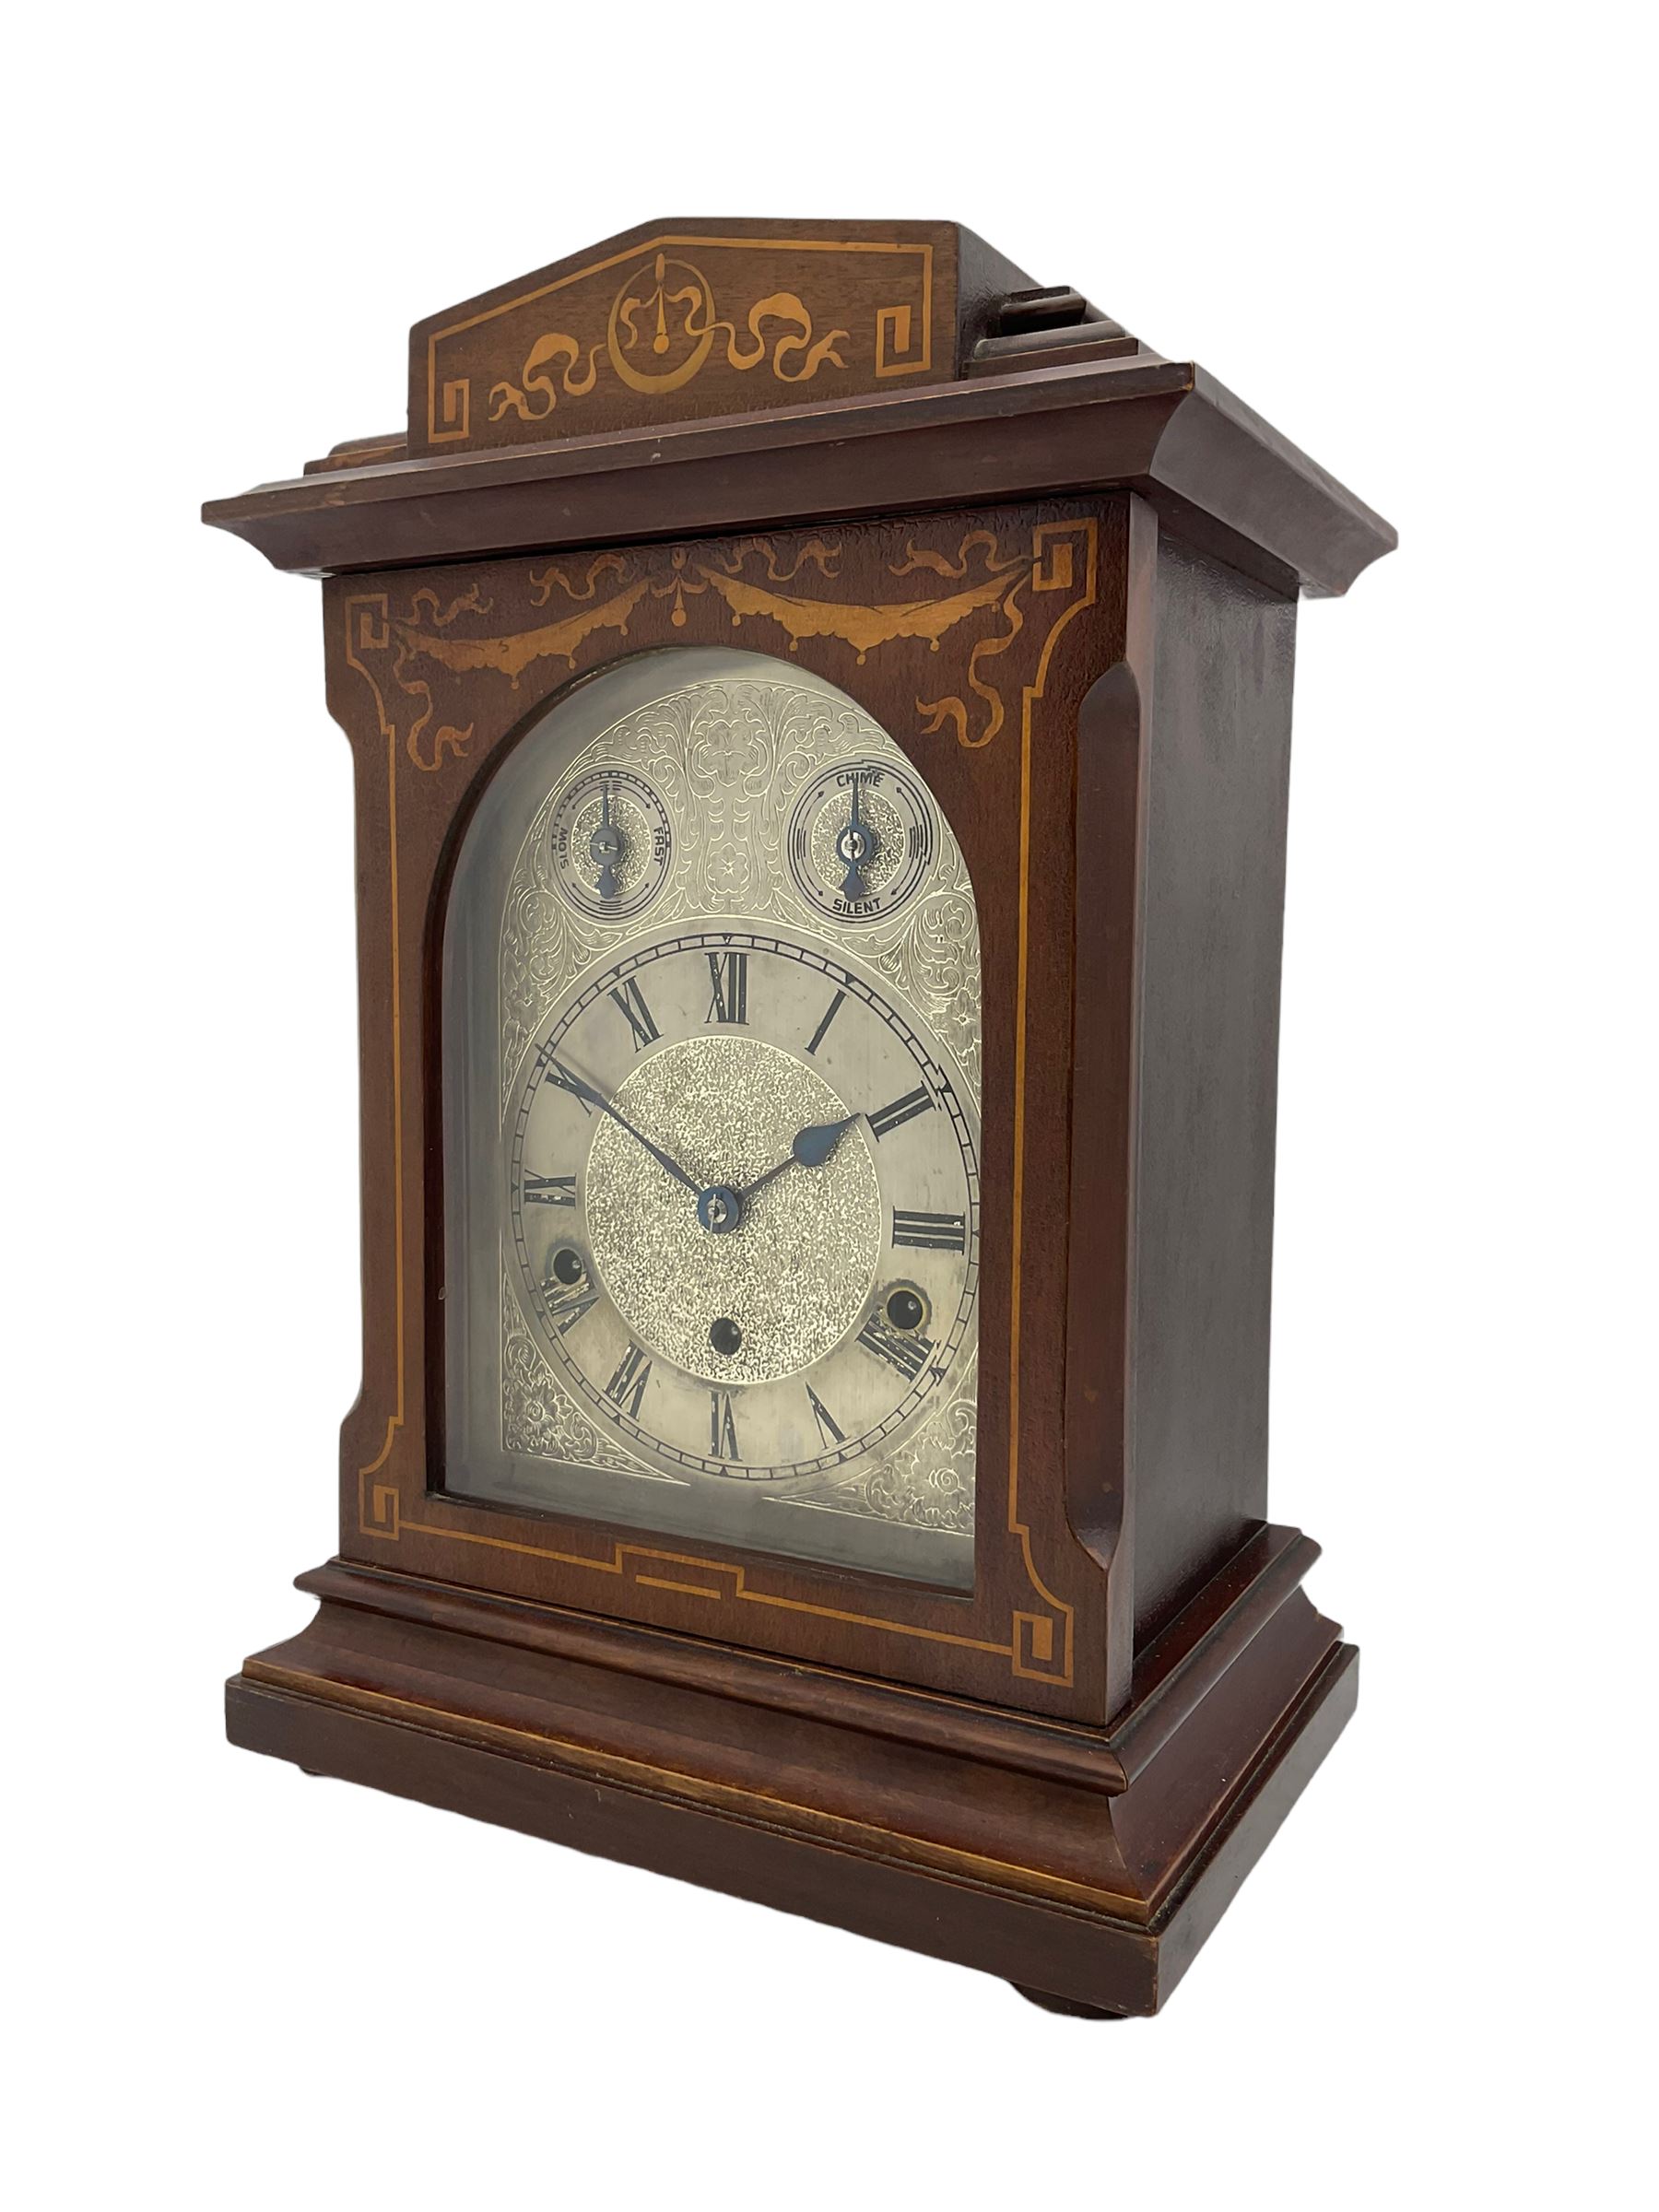 An Edwardian c1905 Westminster chiming mantle clock in a mahogany Sheraton style case with inlay an - Image 2 of 3